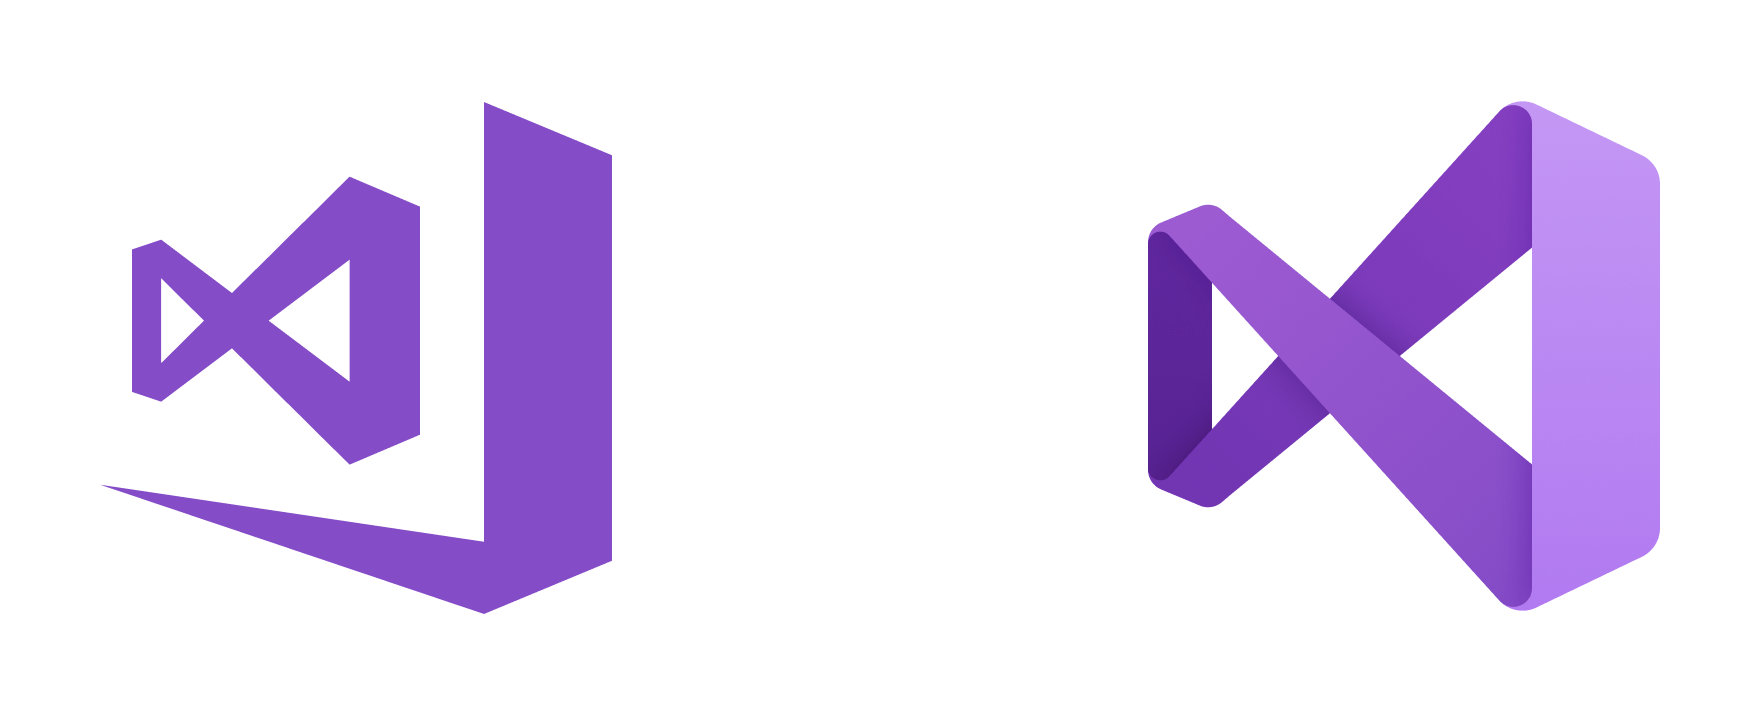 Old vs New Microsoft Logo - A preview of UX and UI changes in Visual Studio 2019 | The Visual ...